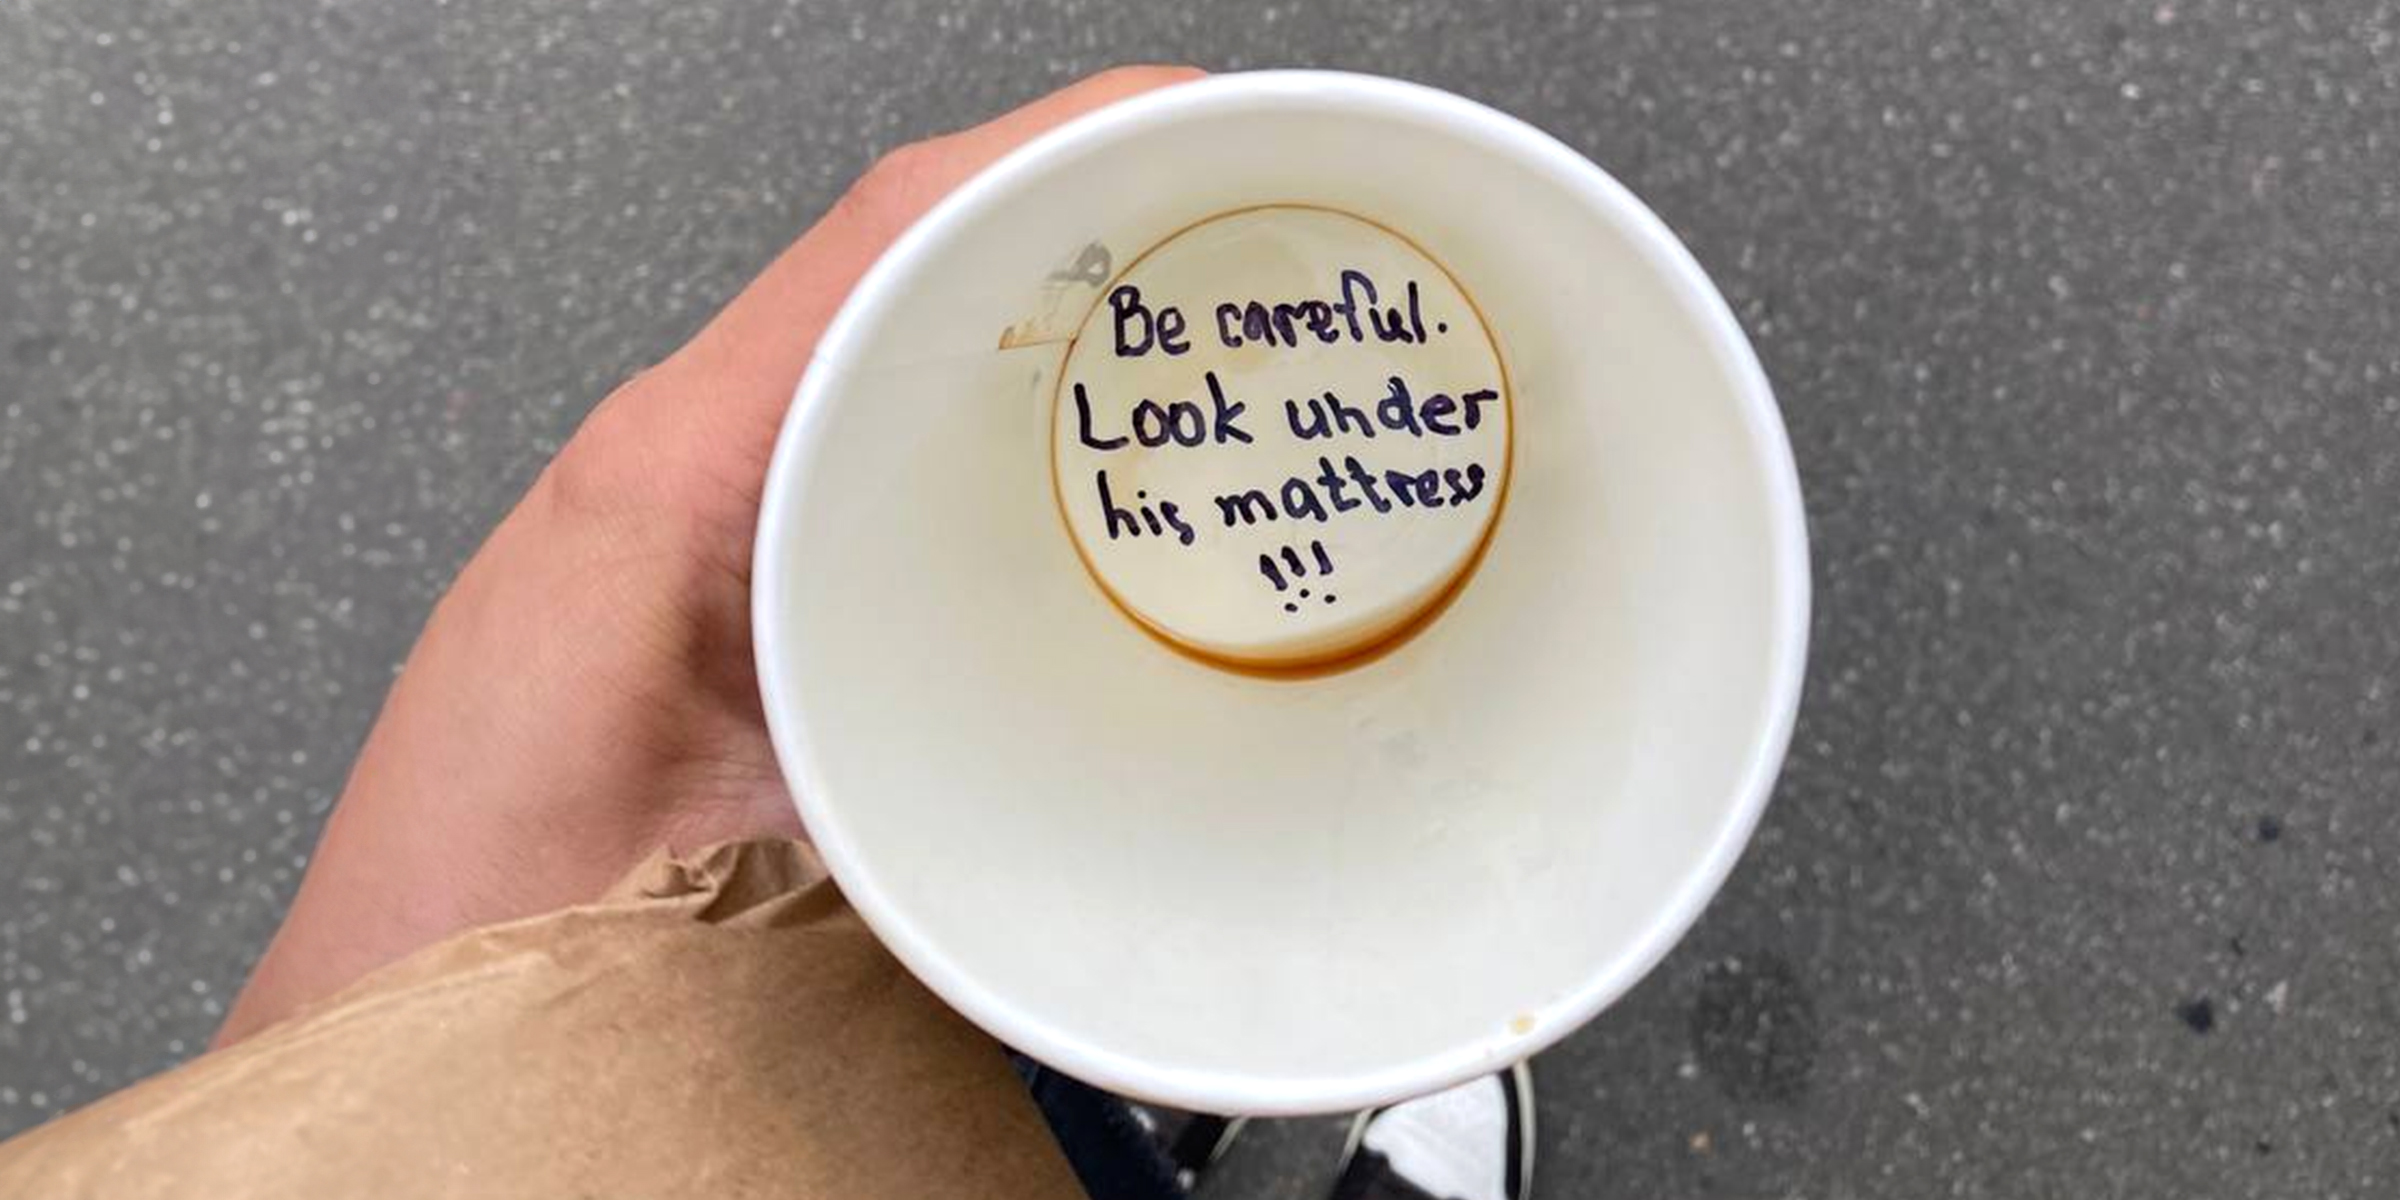 A message at the bottom of a takeaway cup | Source: Amomama